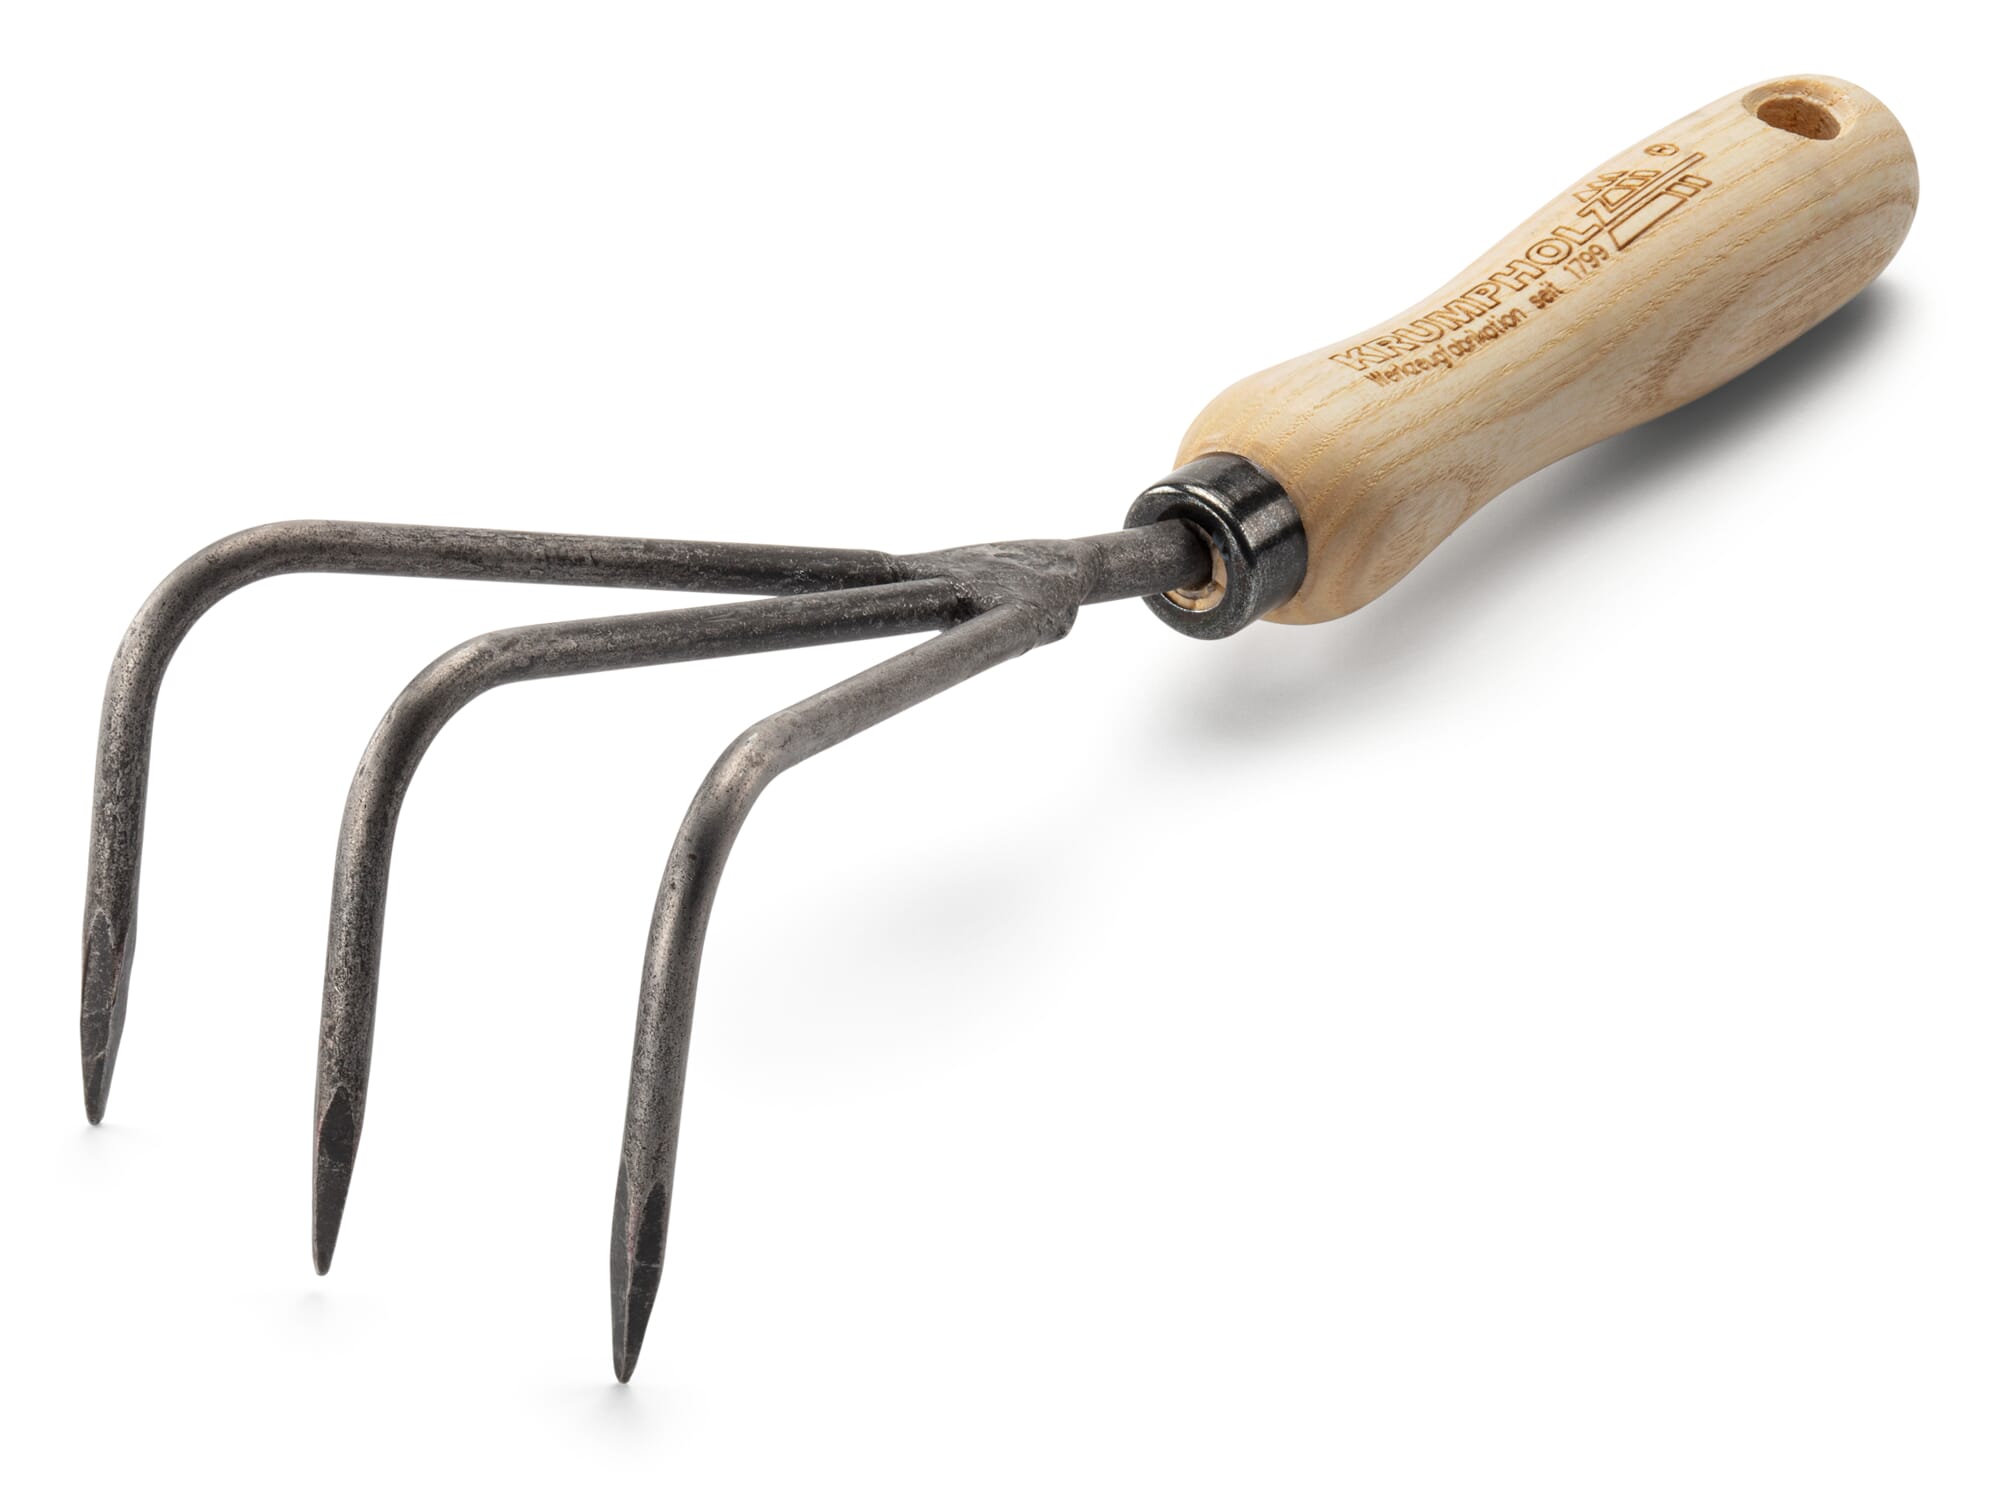 Image of Hand cultivator with tines of different lengths